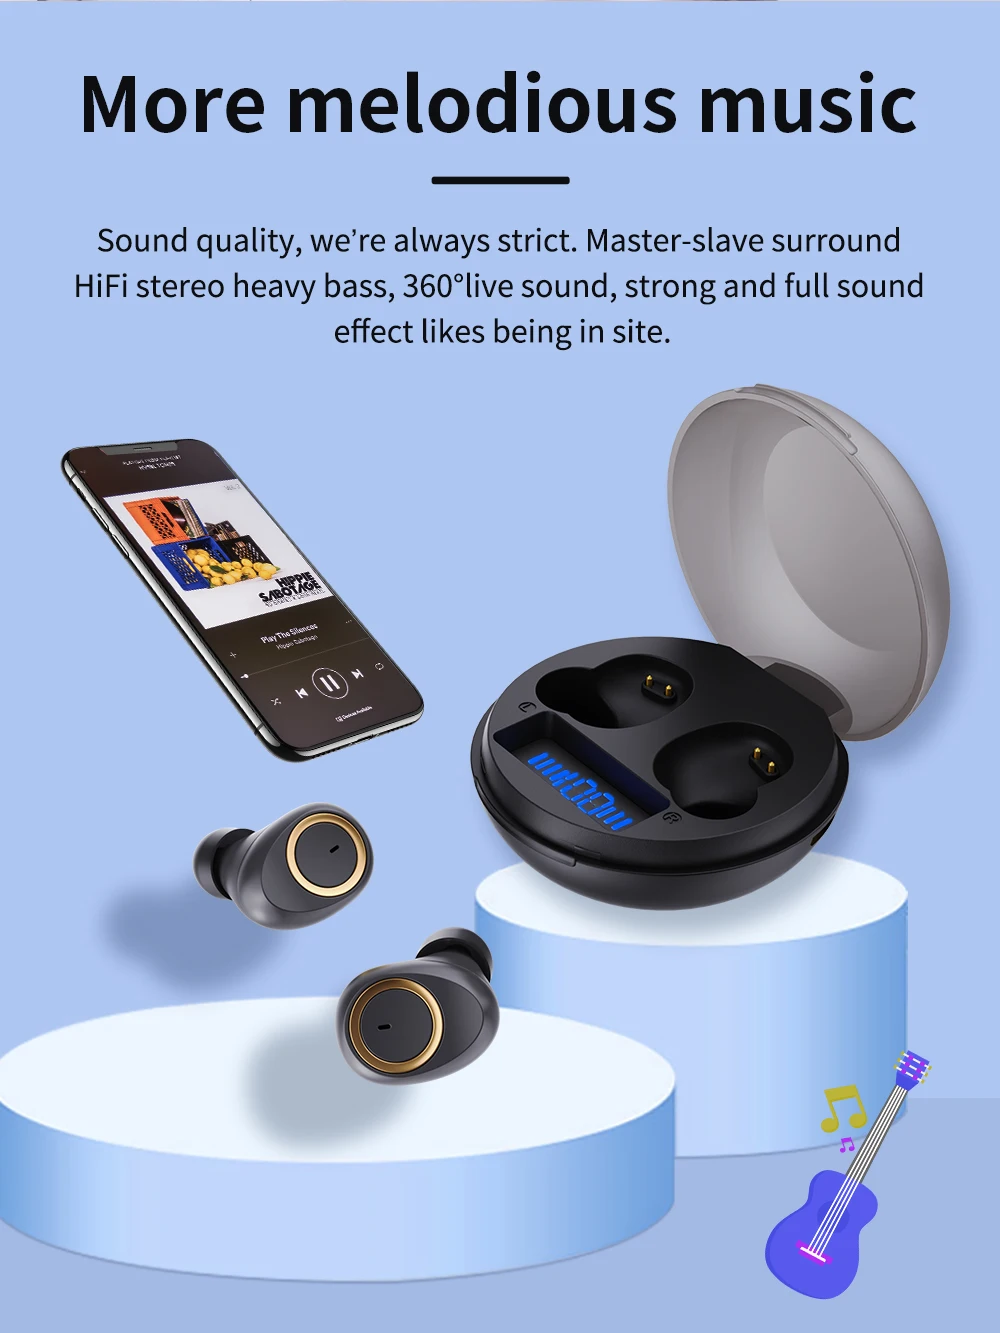 Bluedio D3 wireless earphone portable tws earbuds touch control bluetooth 5.1 in ear headset with charging case battery display